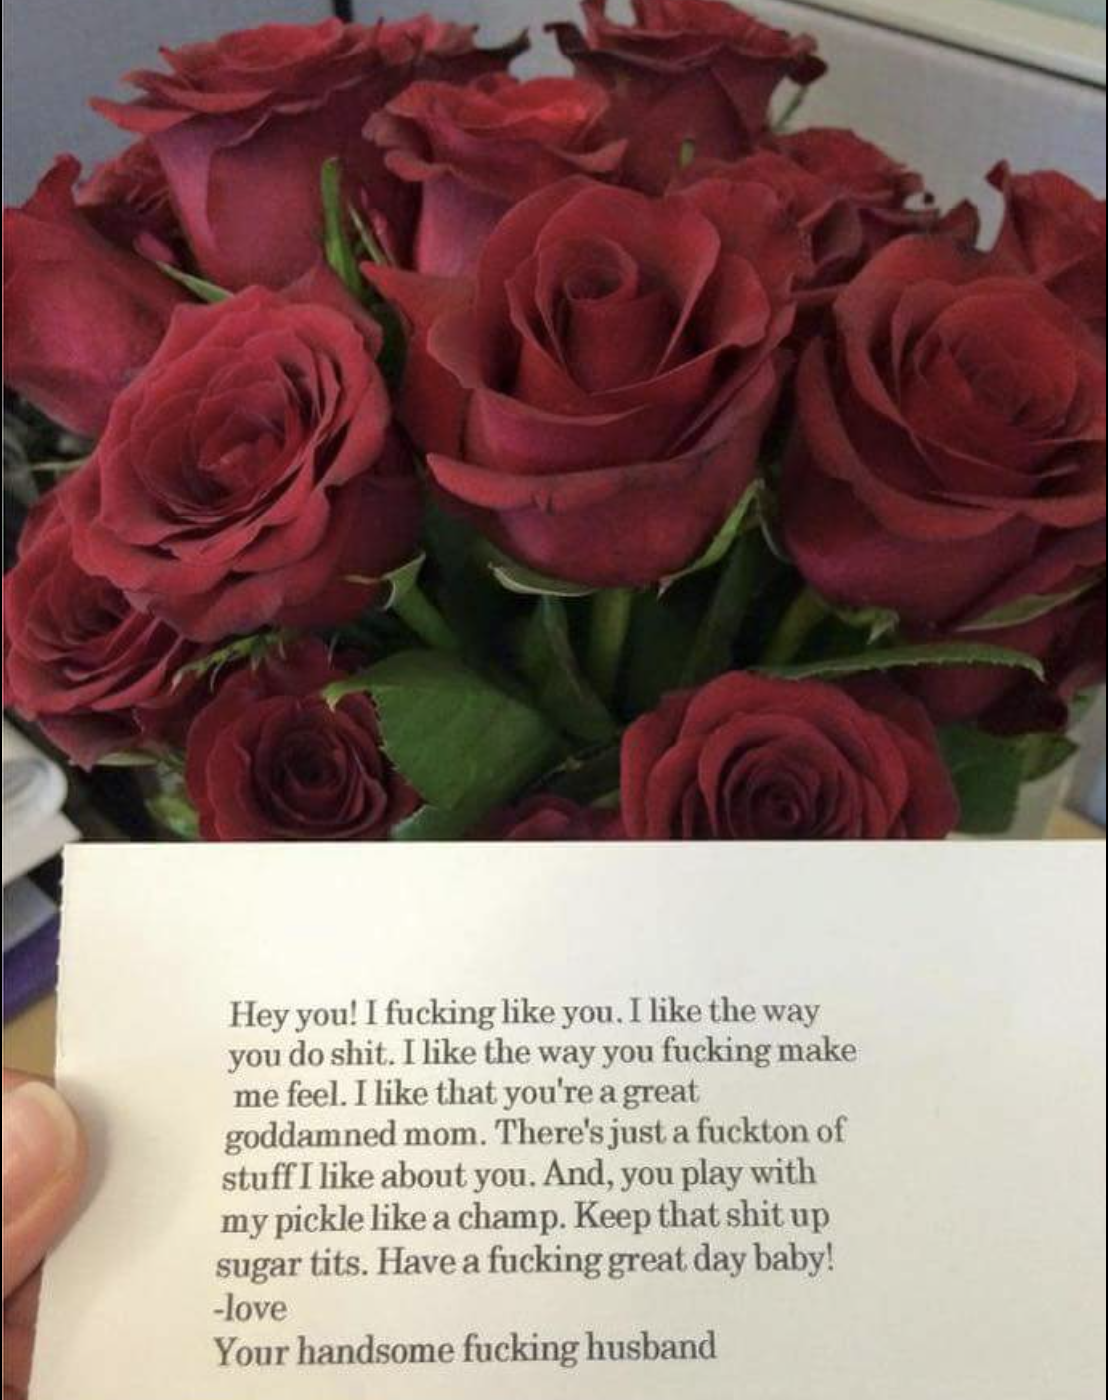 funny love note with flowers - Hey you! I fucking you. I the way you do shit. I the way you fucking make me feel. I that you're a great goddamned mom. There's just a fuckton of stuff I about you. And, you play with my pickle a champ. Keep that shit up sug